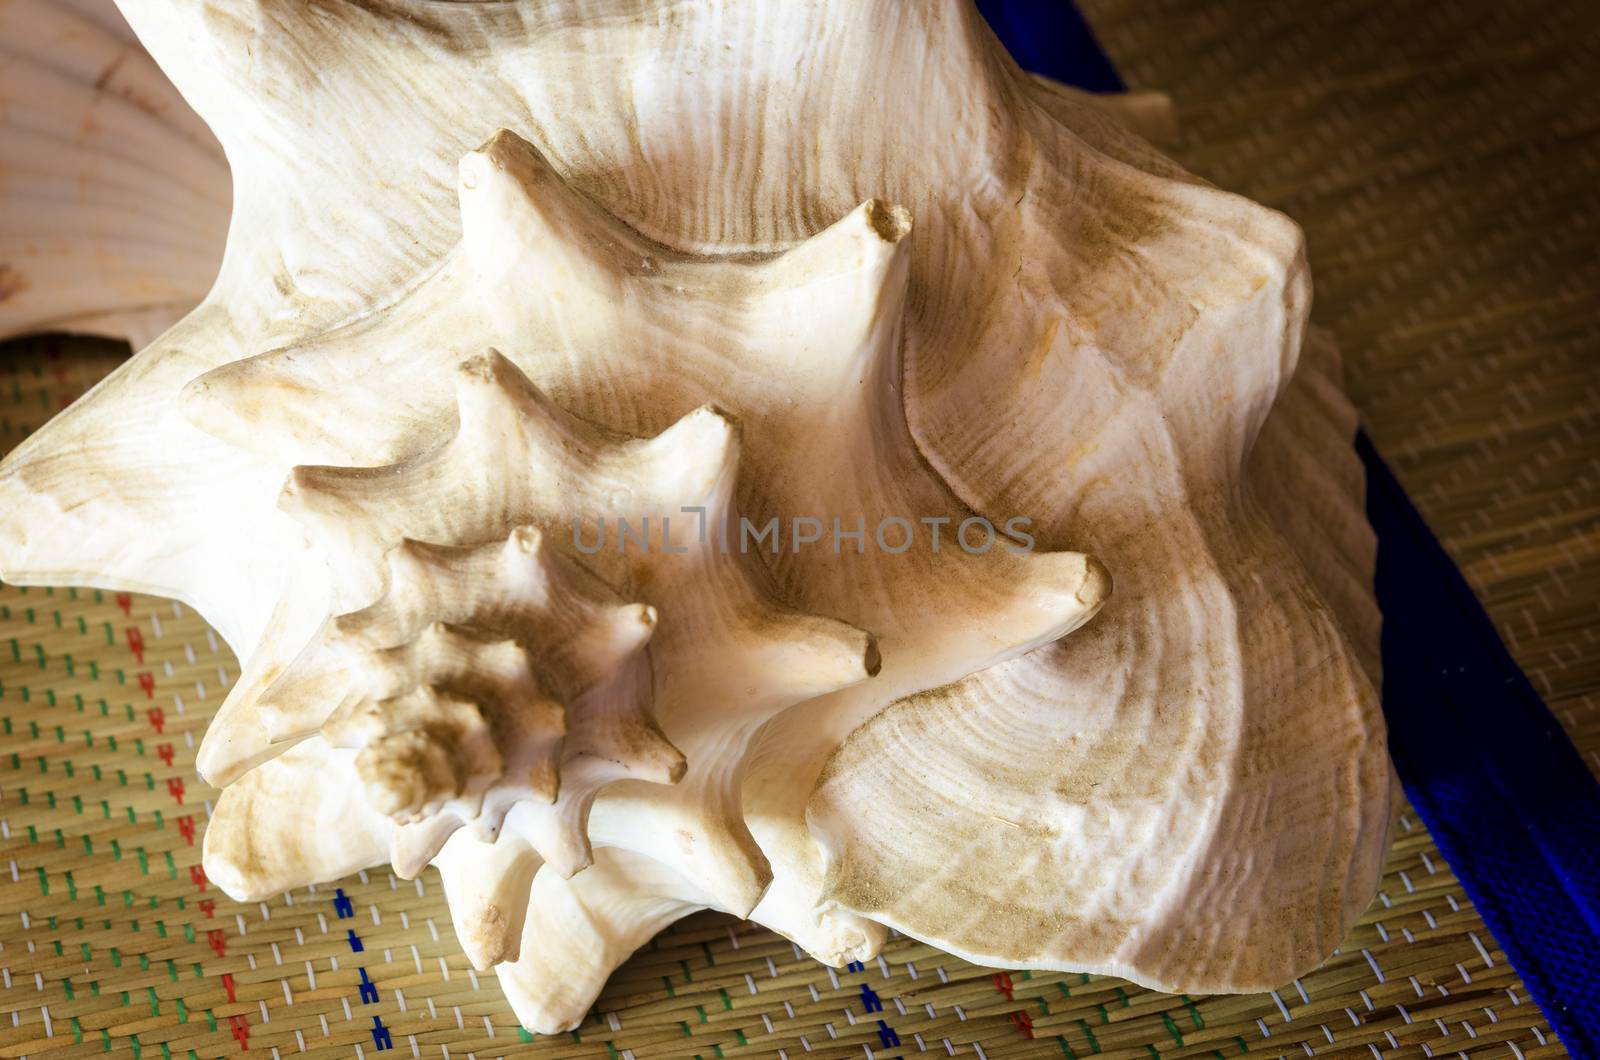 The shell of the conches is formed by an asymmetrical piece wound in spiral